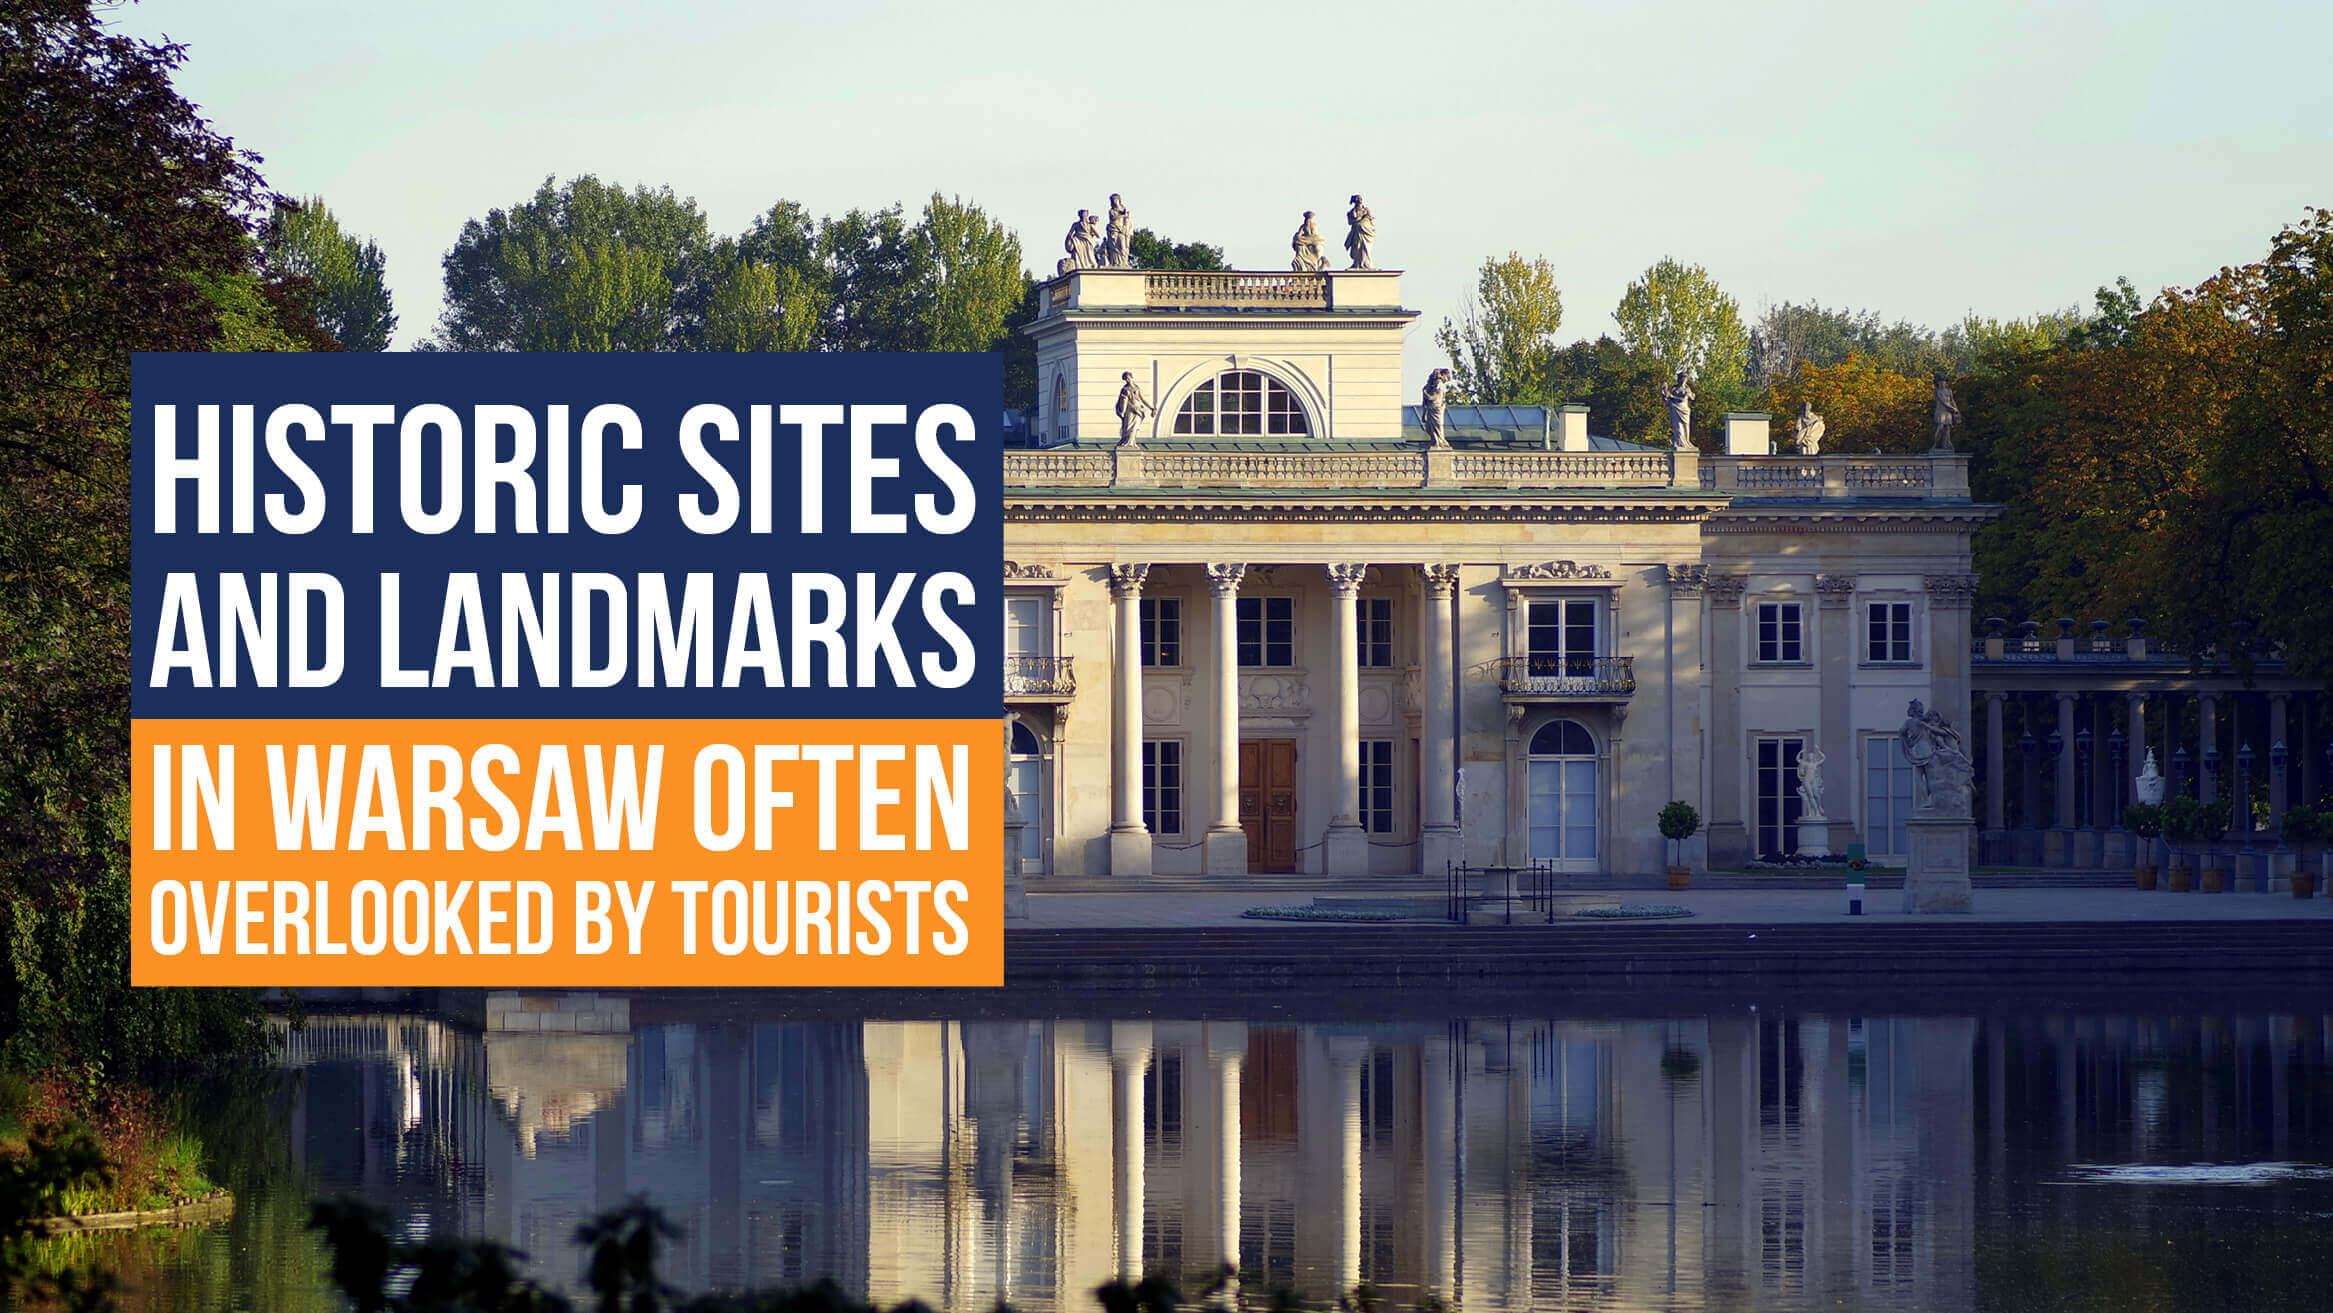 Historic Sites and Landmarks in Warsaw Often Overlooked by Tourists header